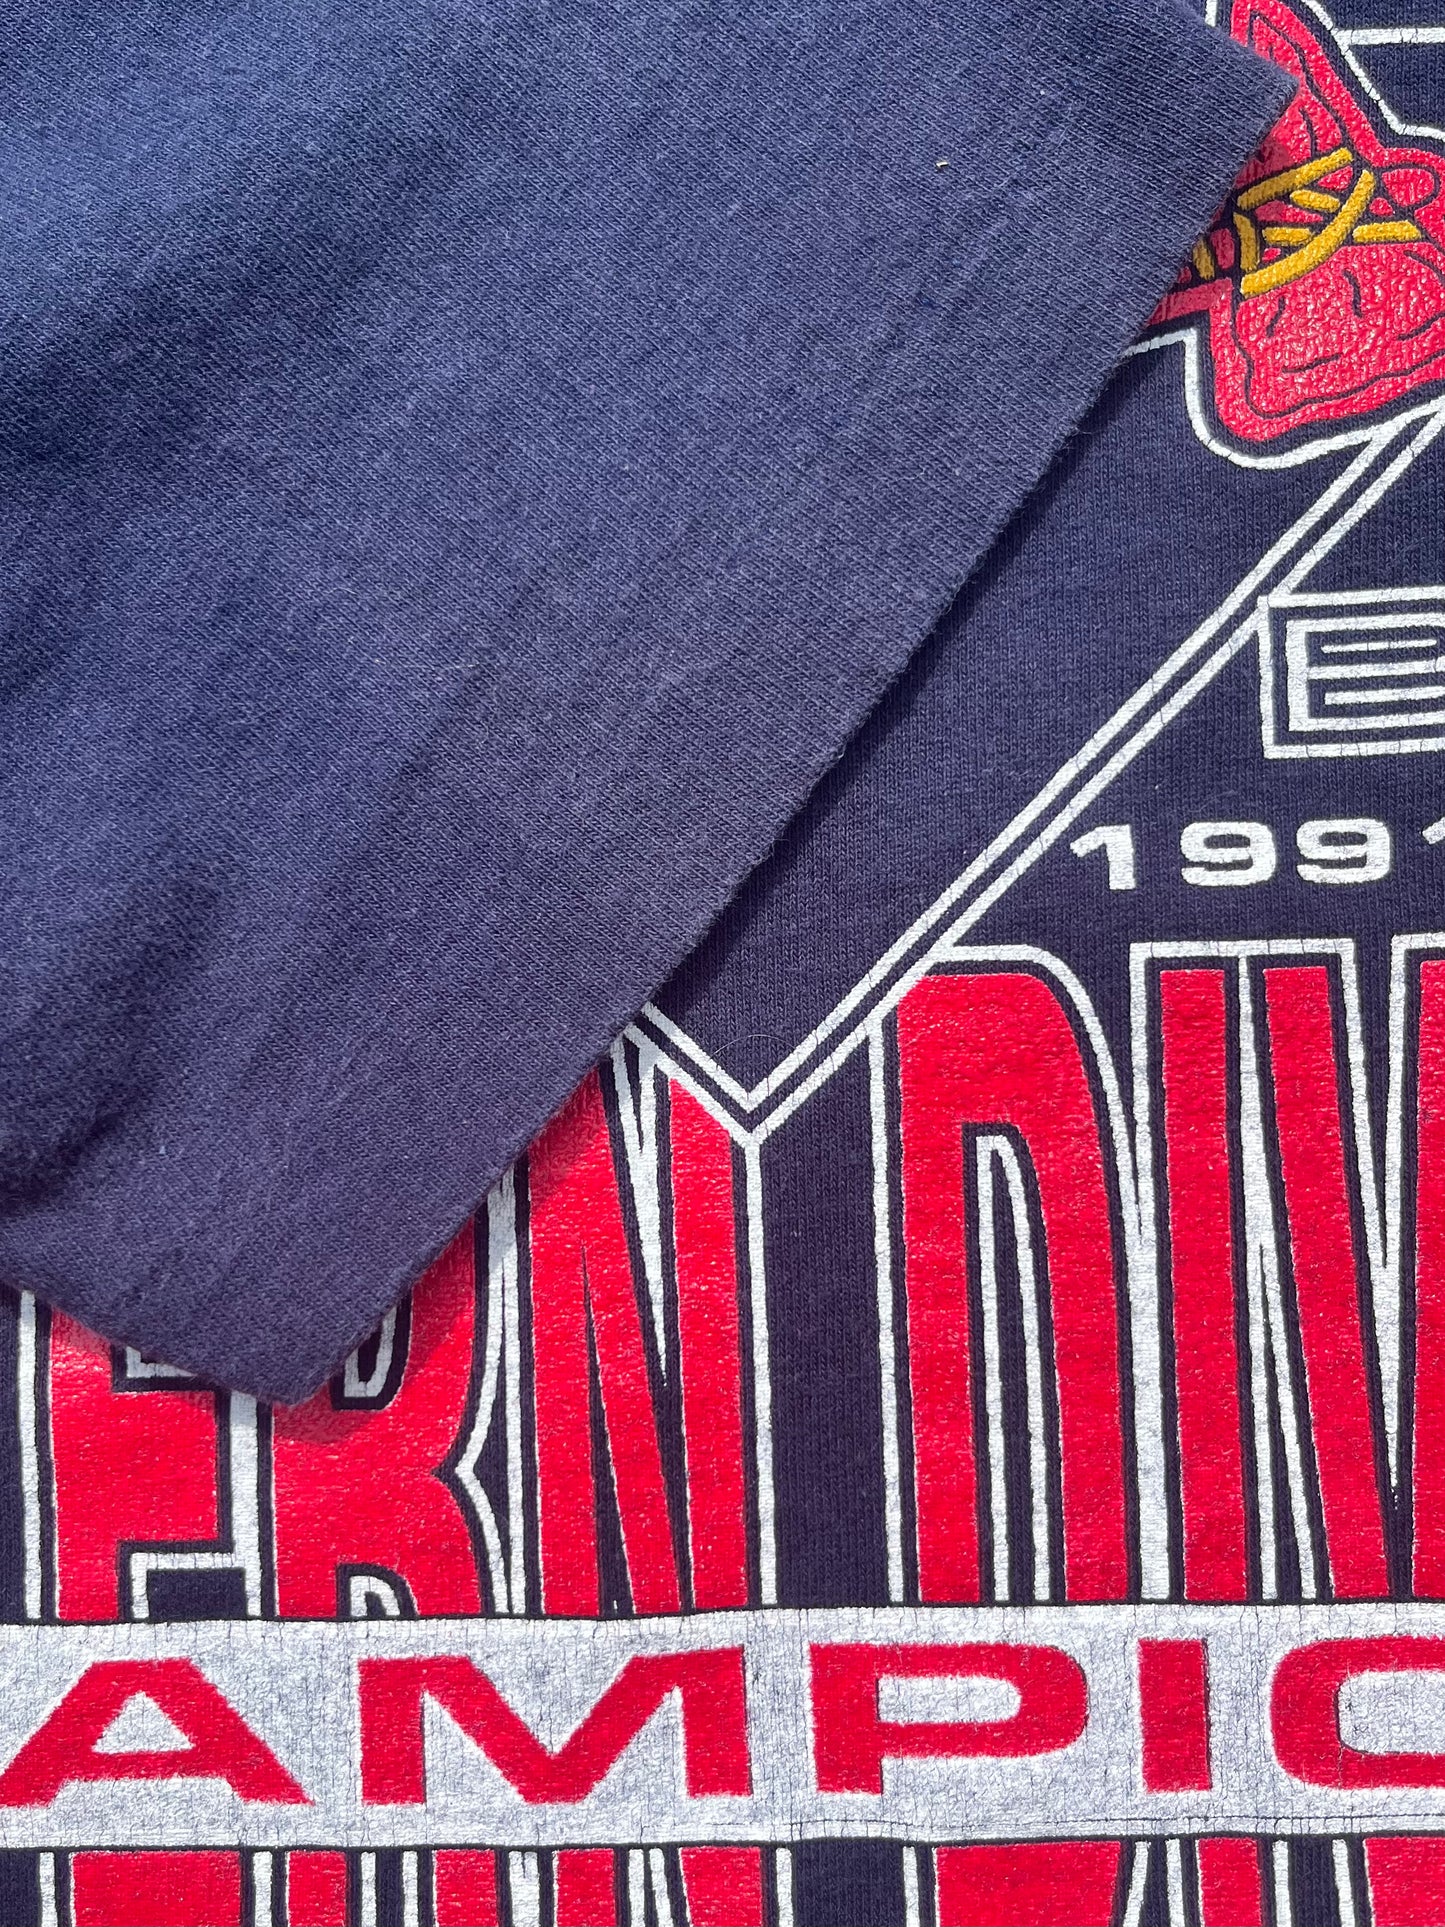 91' Braves Western Division Champs tee